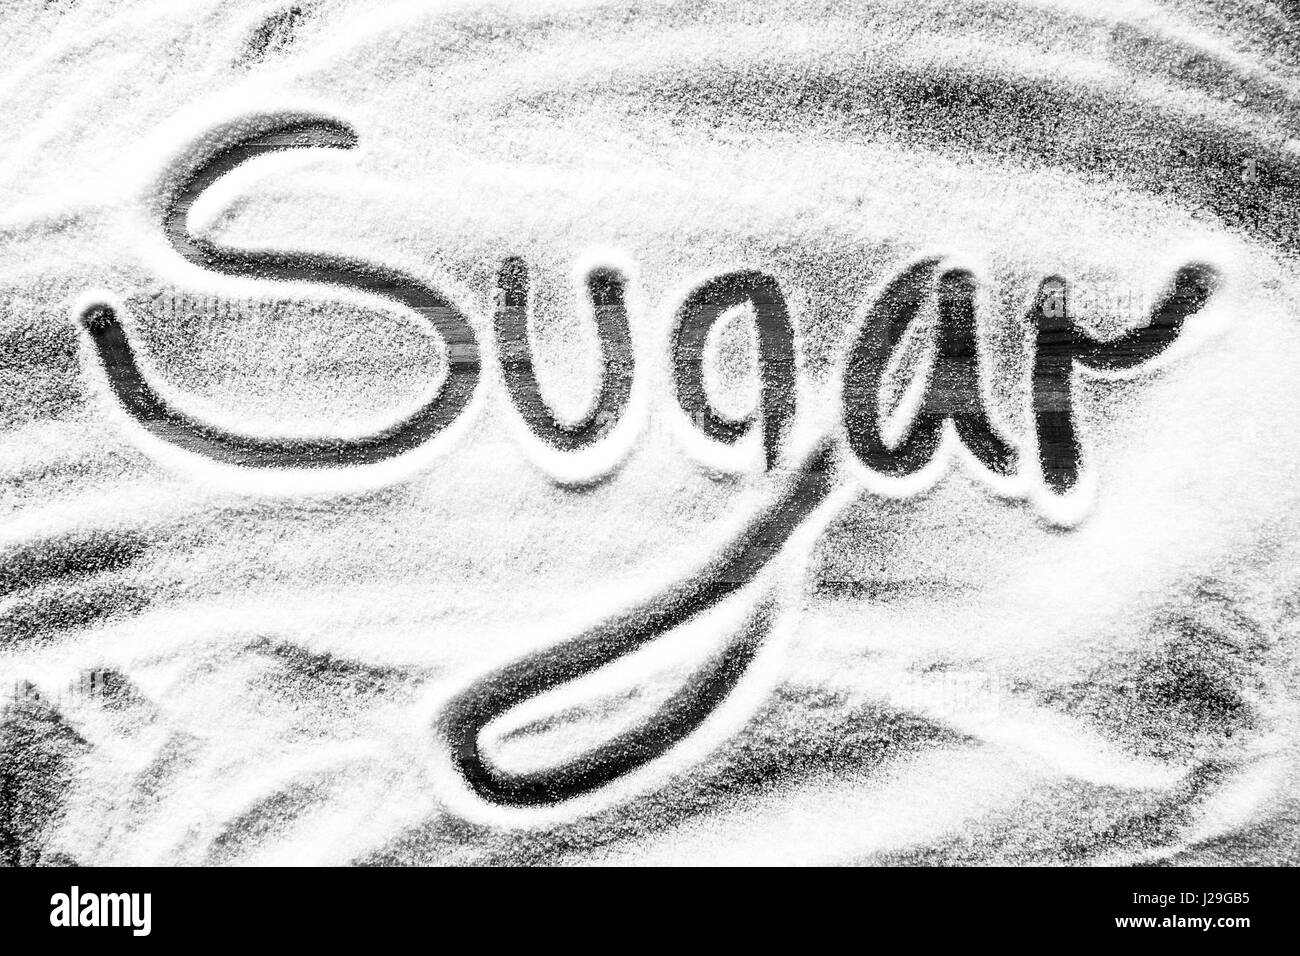 No sugar sign with sugary background Stock Photo